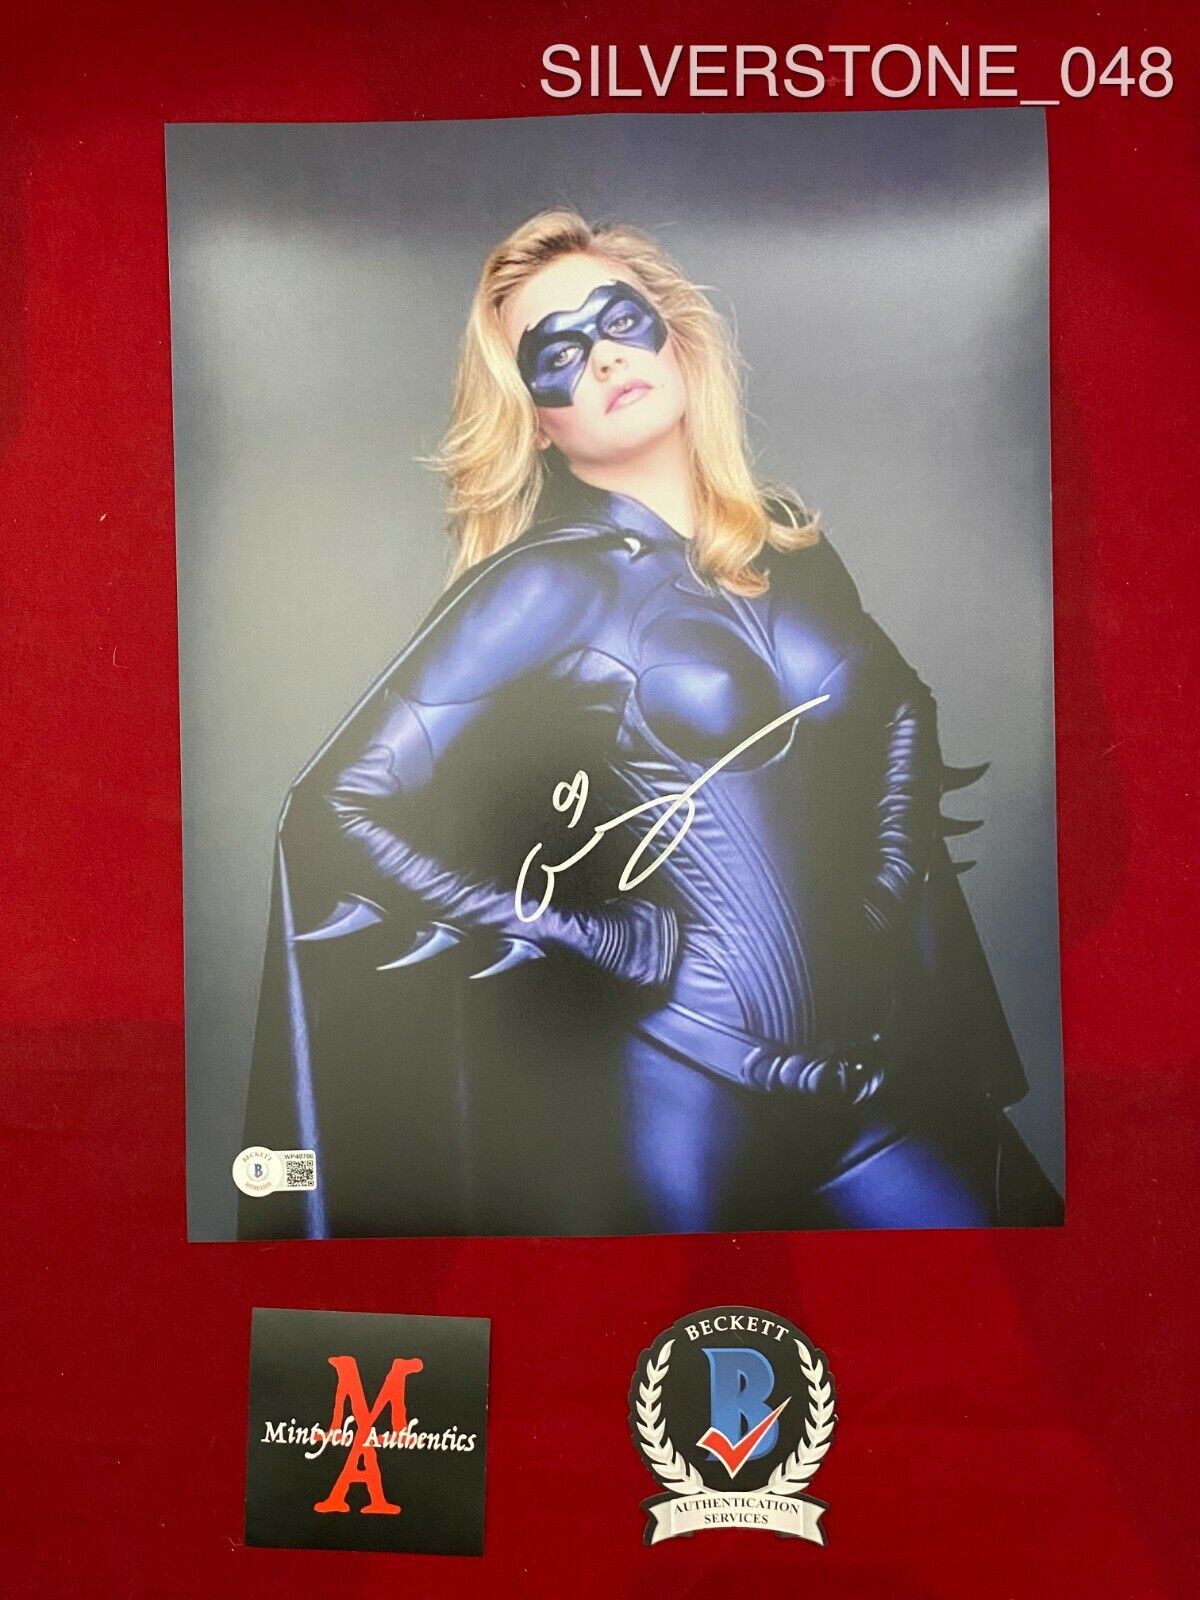 ALICIA SILVERSTONE AUTOGRAPHED SIGNED 11x14 Photo Poster painting! SEXY! BATGIRL! BECKETT COA!